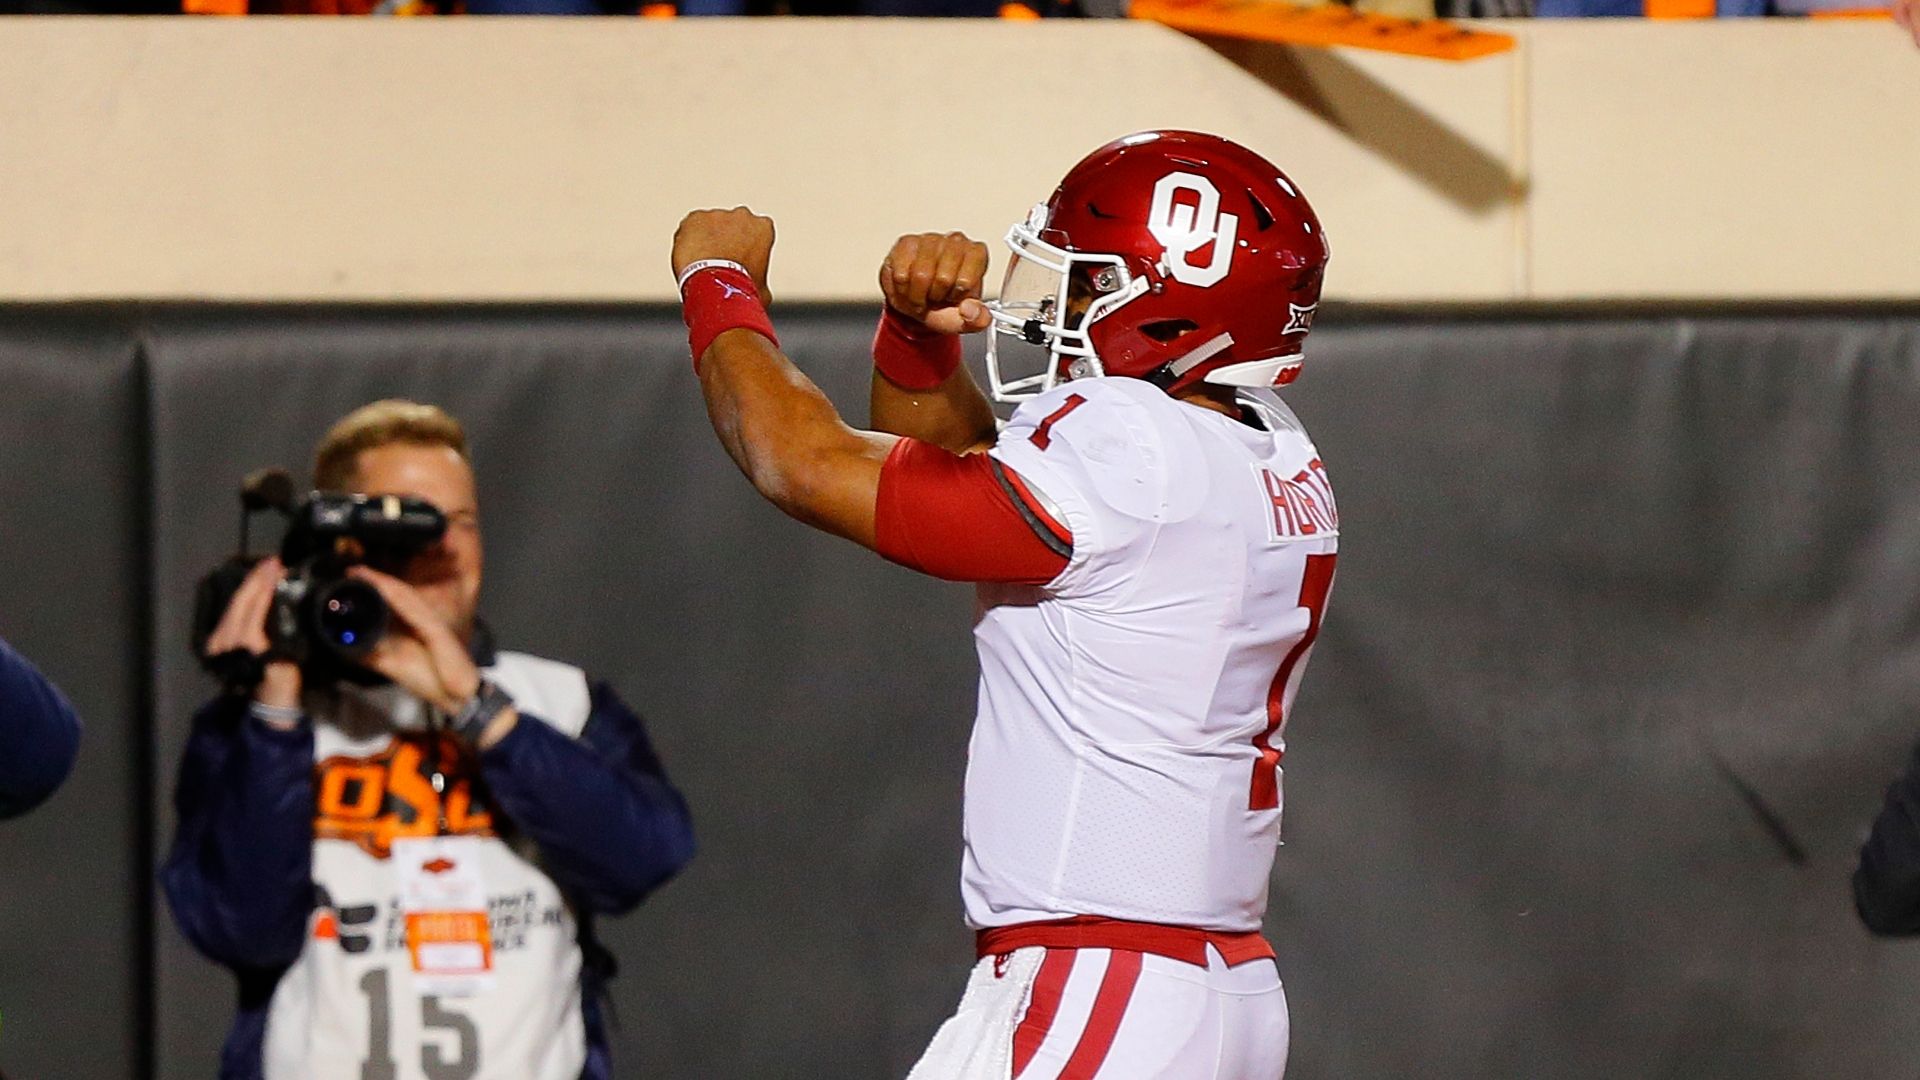 VIDEO: Jalen Hurts Trolled Oklahoma State After TD With Alumni Dez Bryant's  Celebration